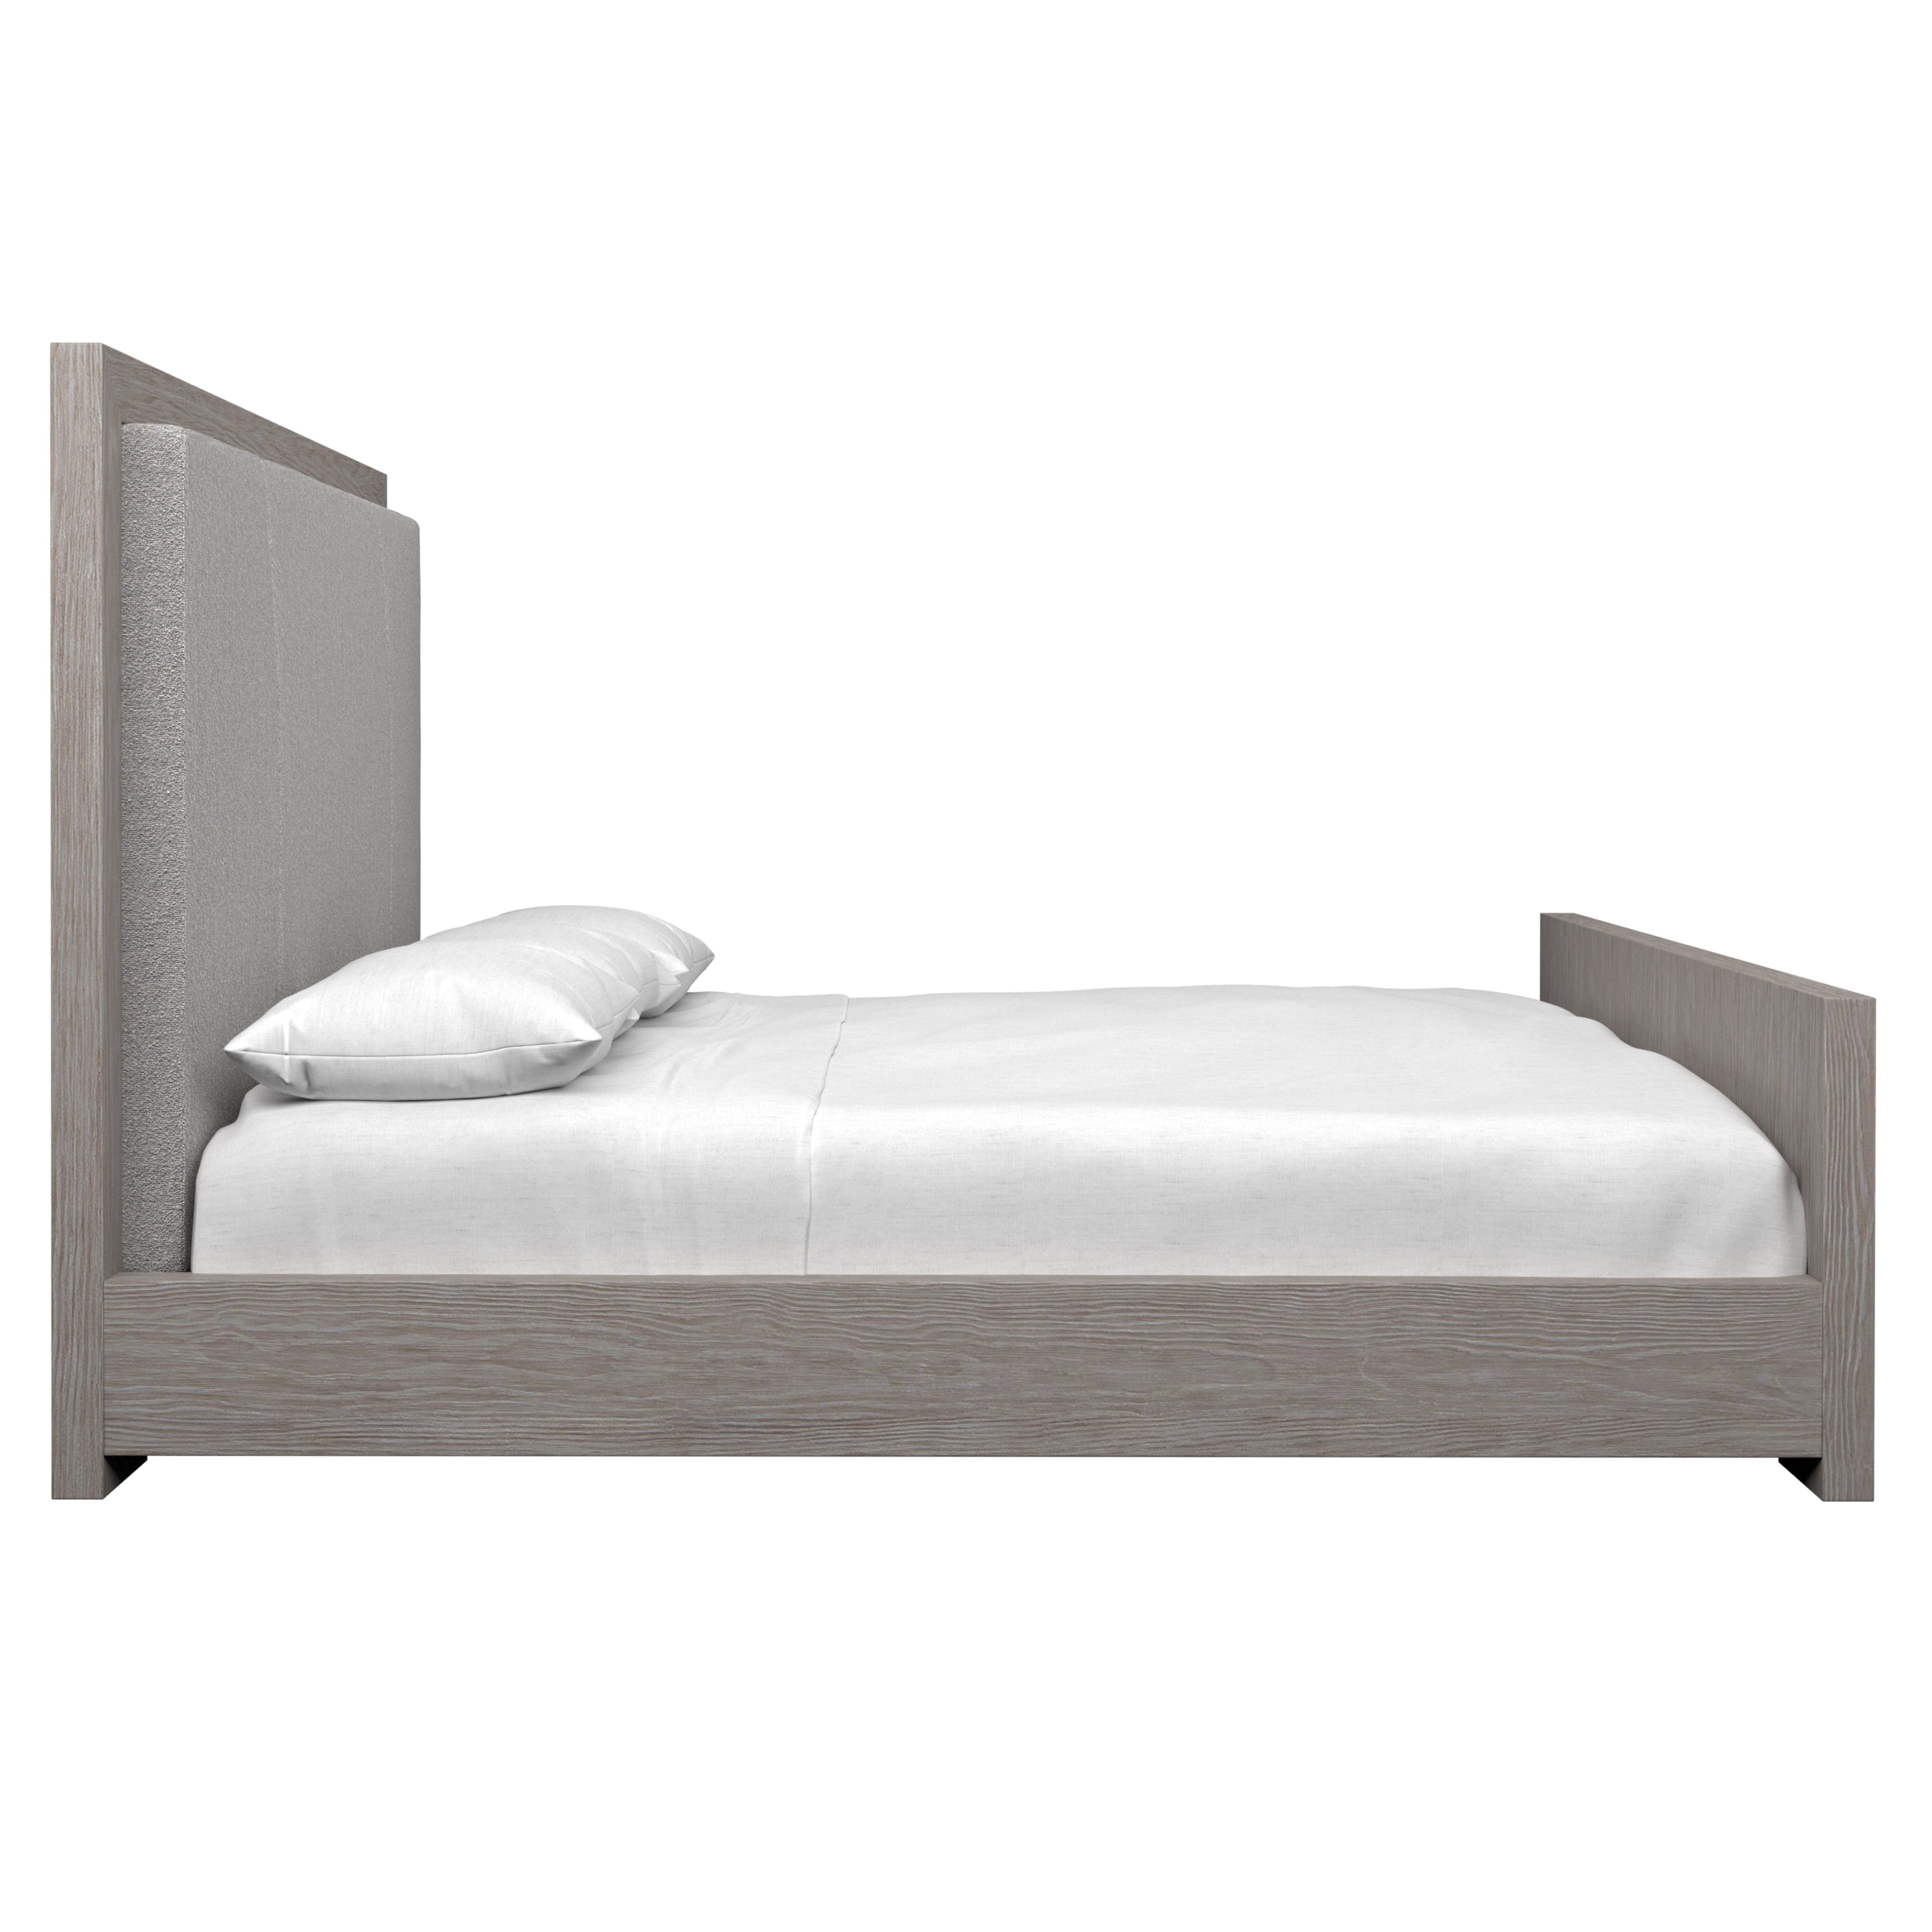 Trianon Queen Panel Bed in Gris Wood Finish